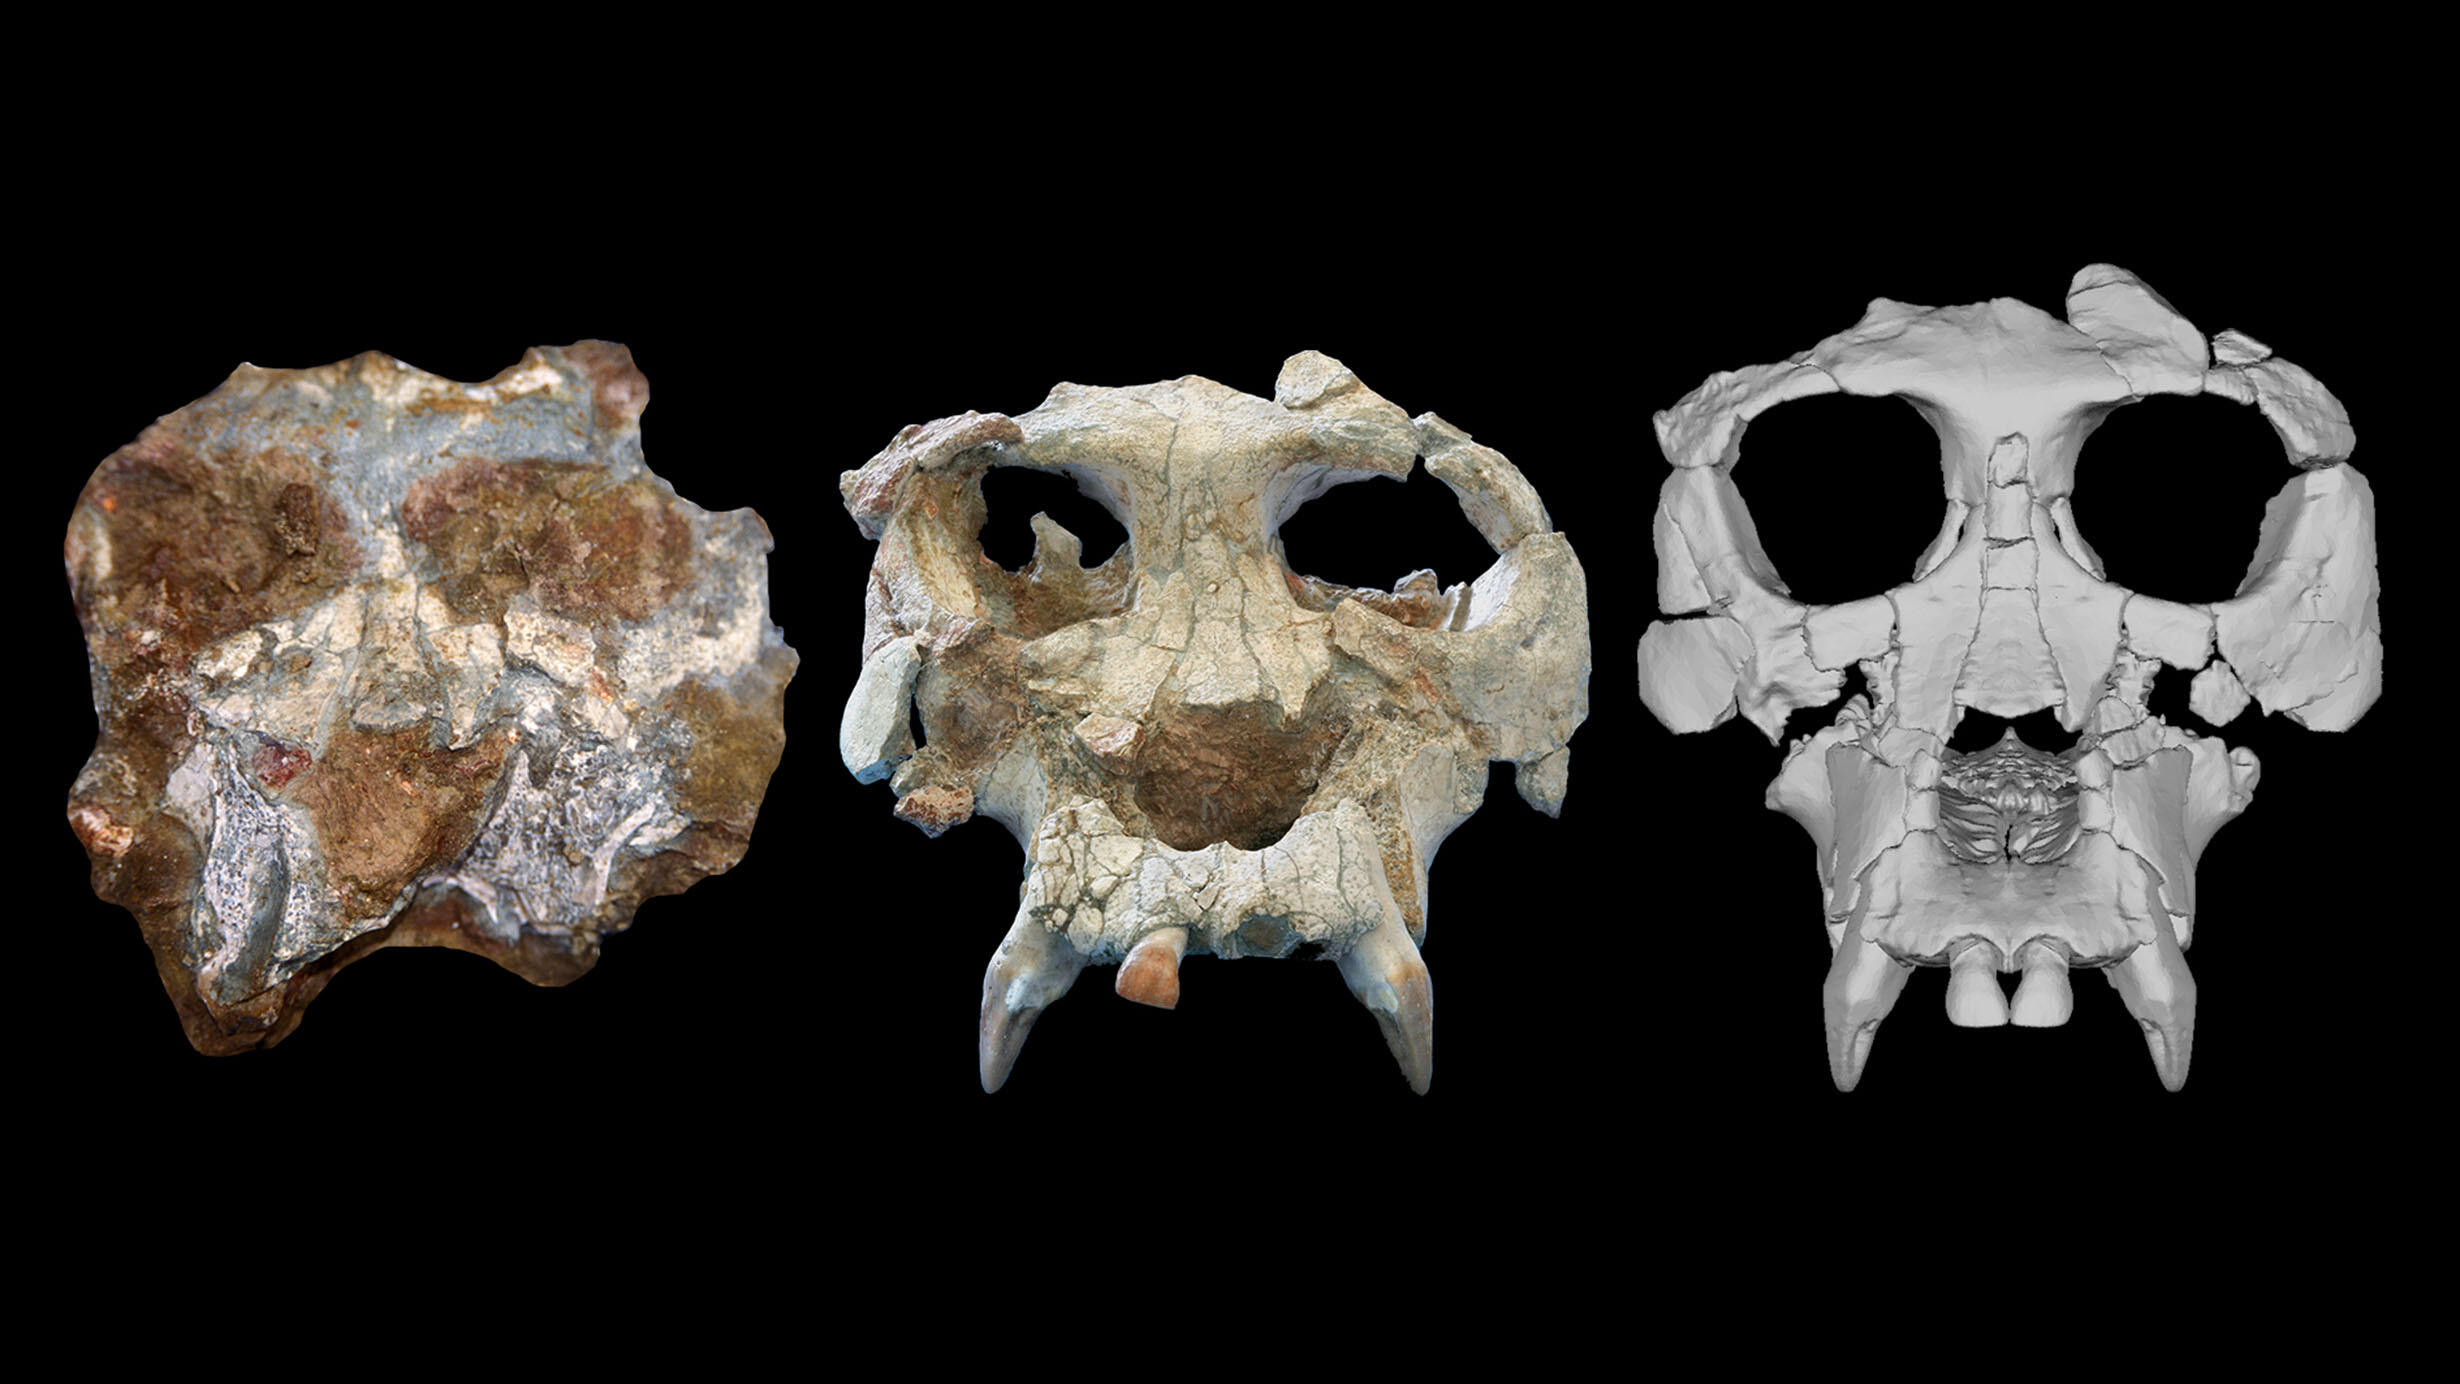 A Pierolapithecus cranium in three stages: a rounded specimen with no distinct features (left), the cranium specimen with distinct features visible (middle), a virtual reconstruction (right).